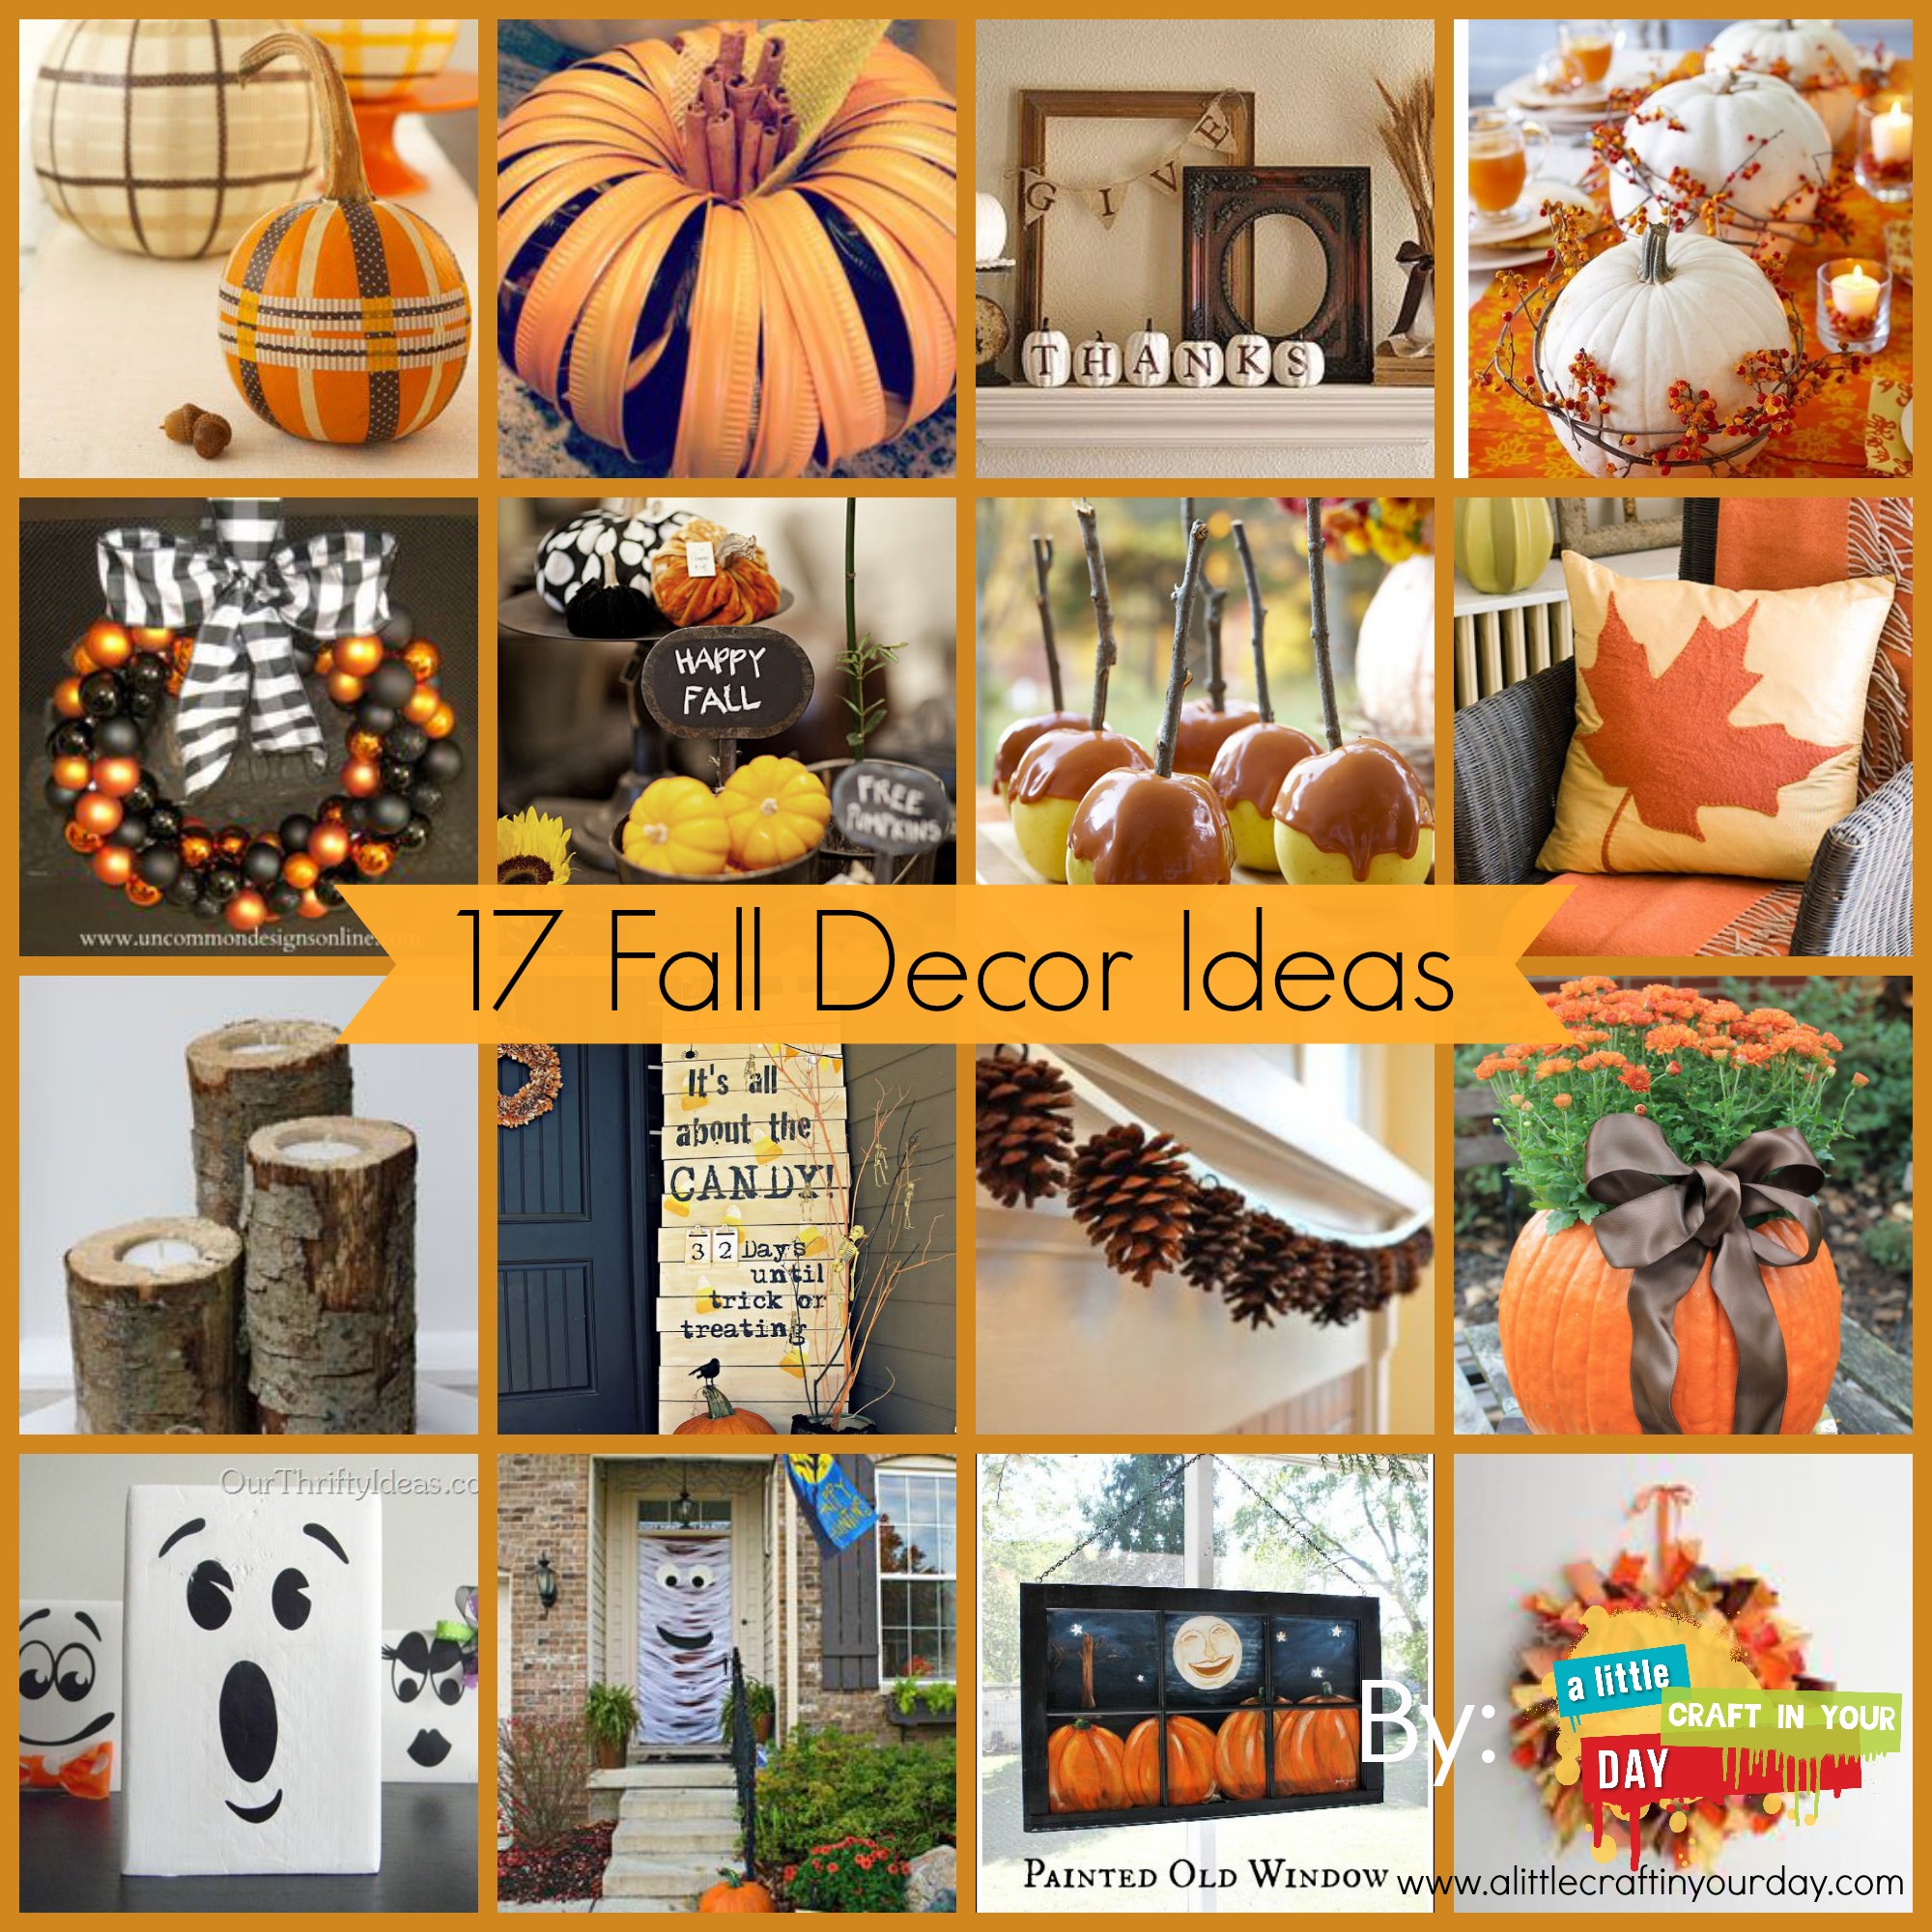 17 Fall Decor Ideas - A Little Craft In Your Day